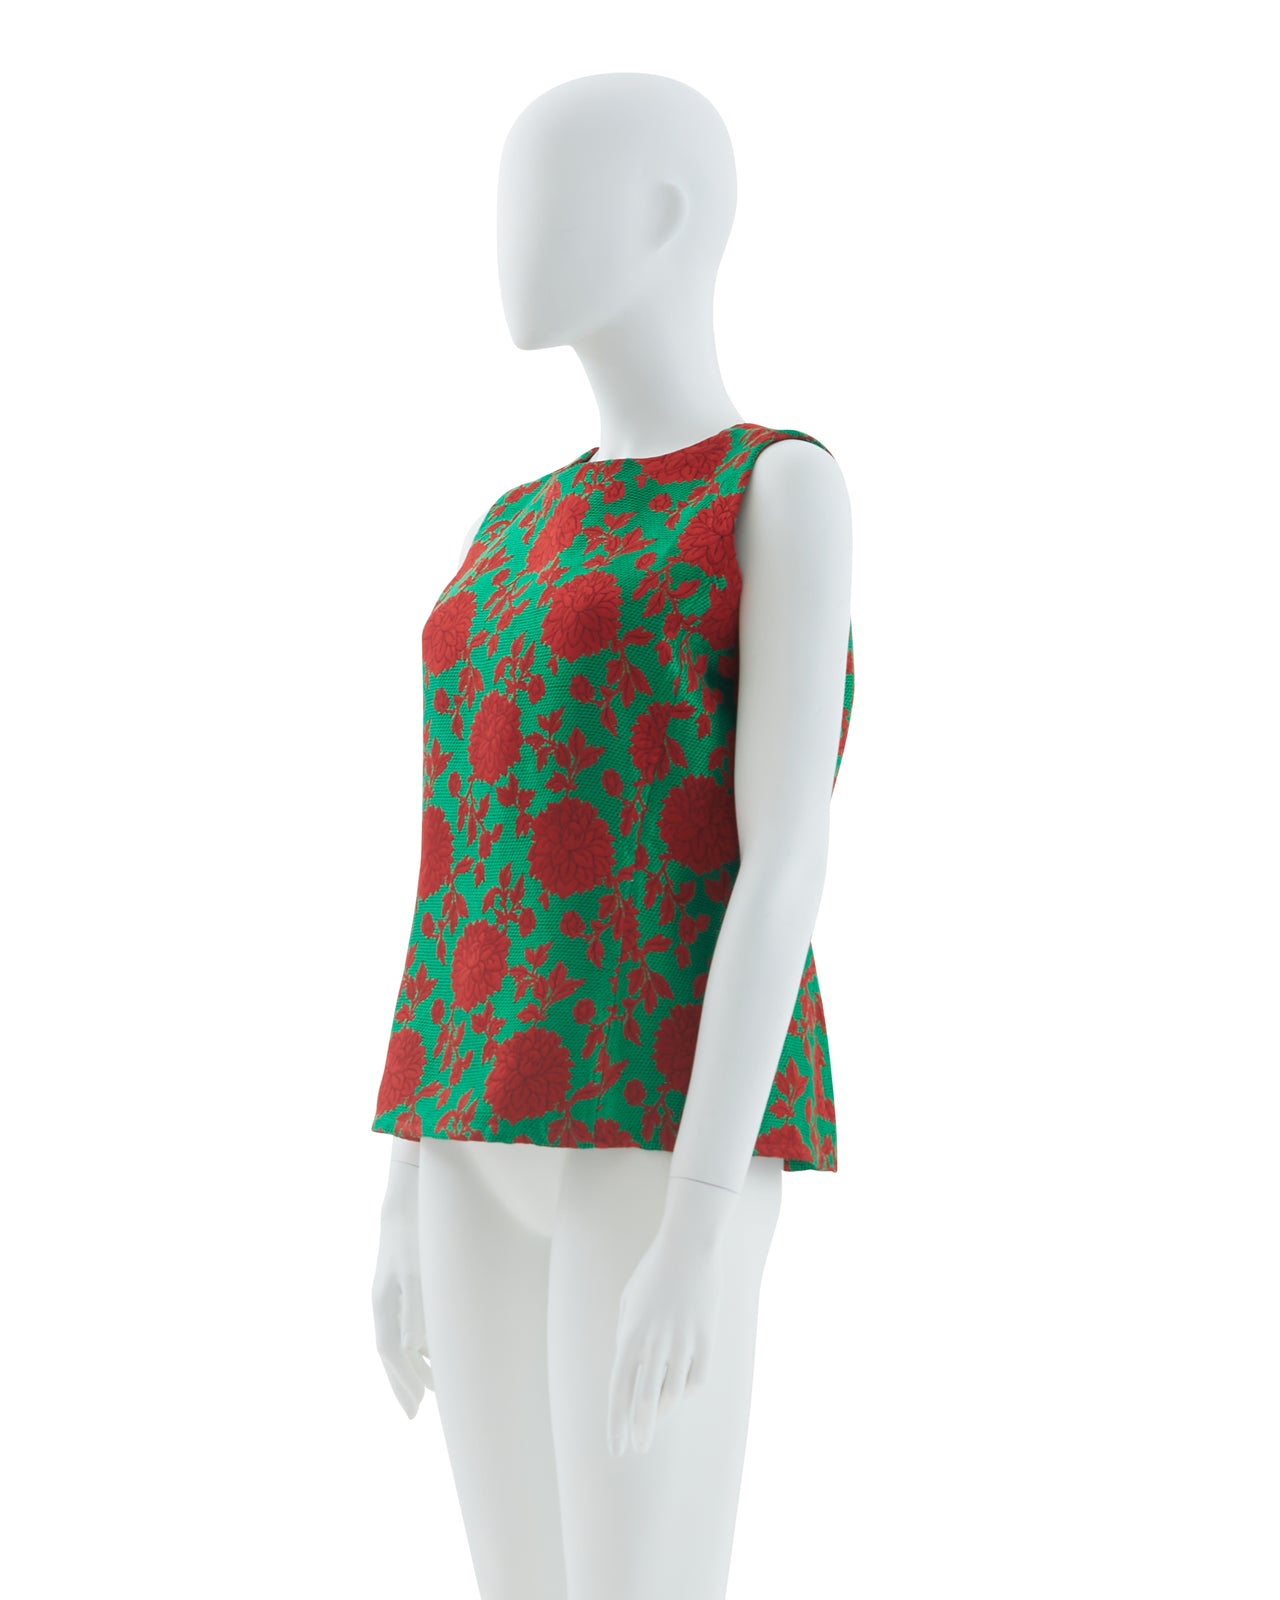 Yves Saint Laurent F/W 1991 Green and red sleeveless floral top